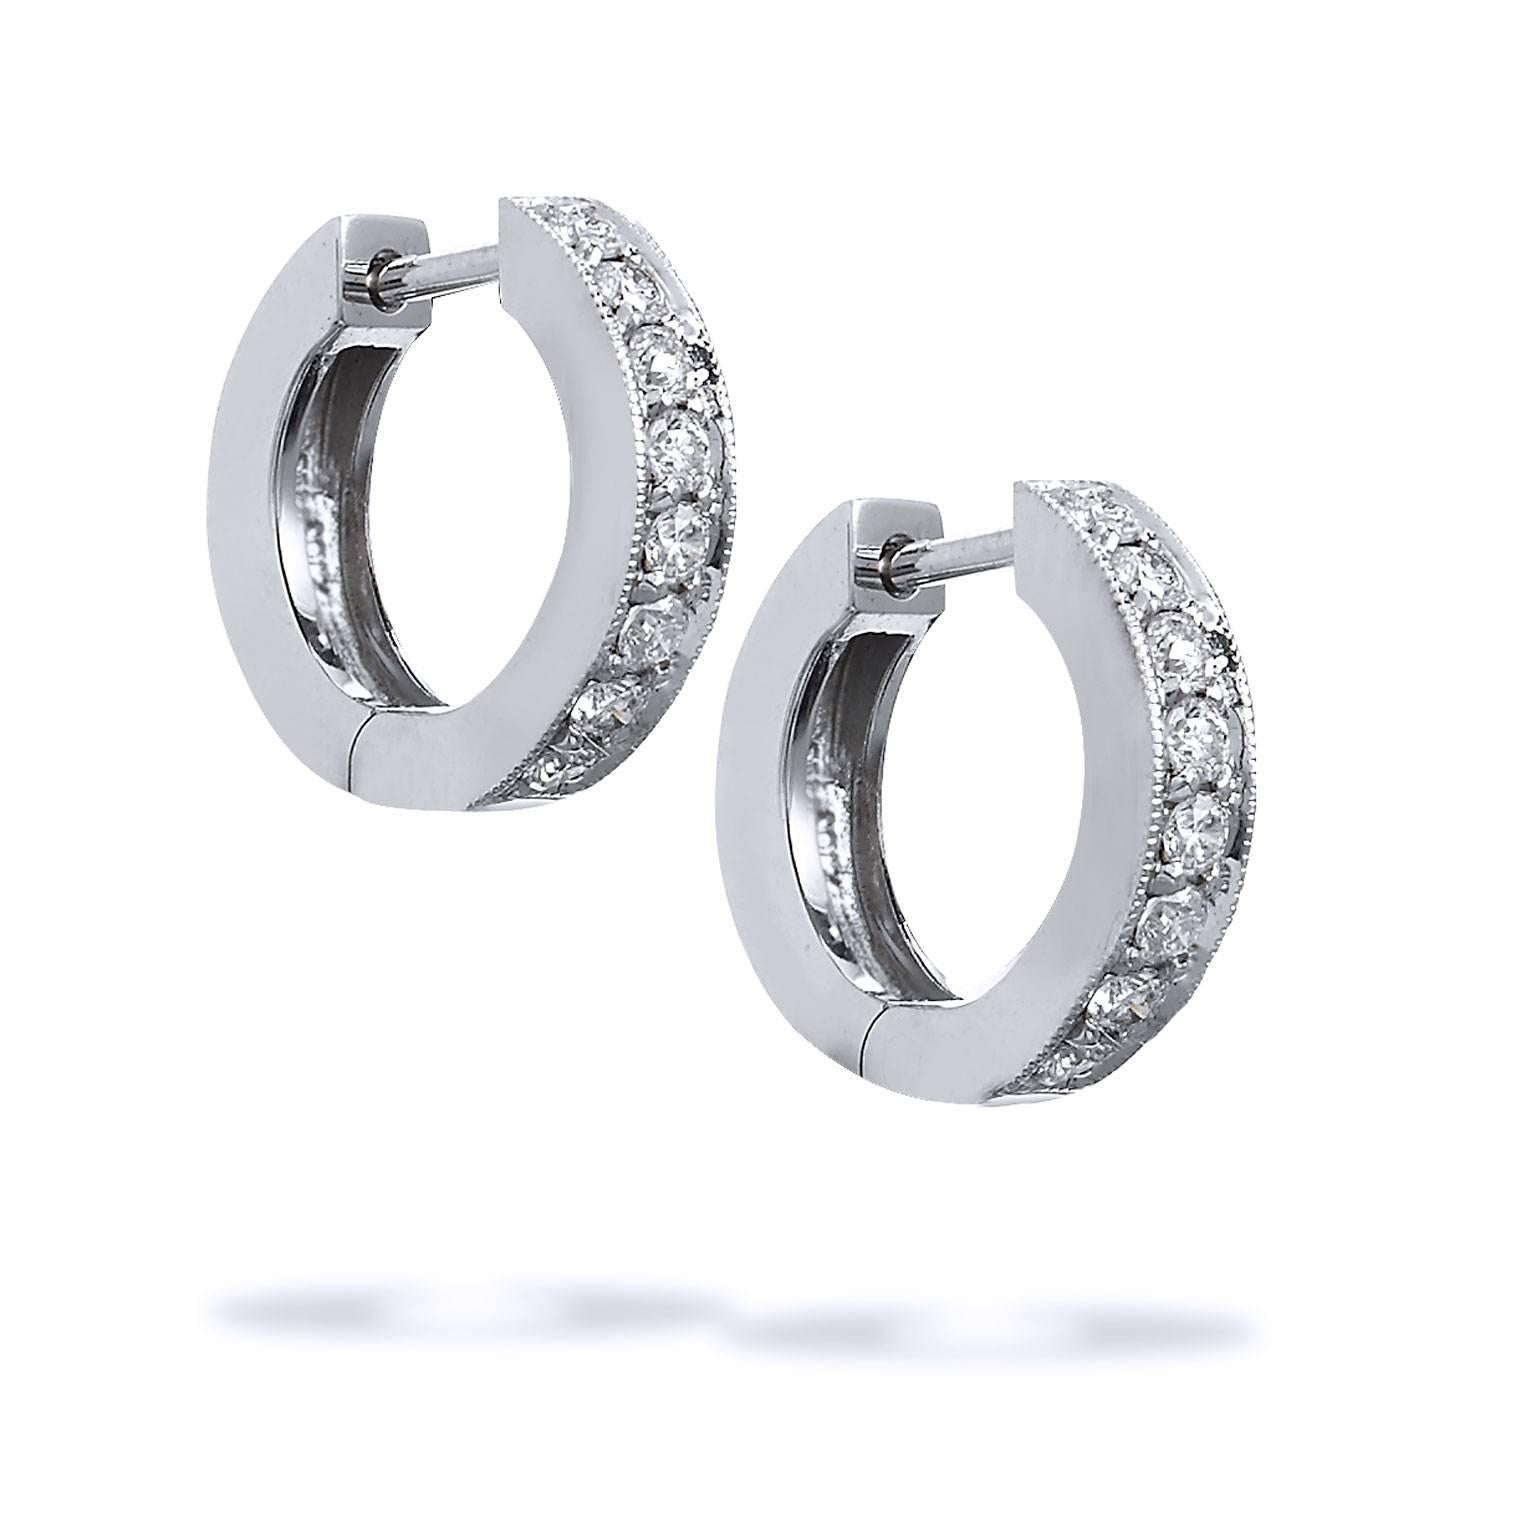 18 karat white gold act as a backdrop to a beautiful sea of 0.29 carat of diamond pave set with milgrain work (H/SI1) in these handmade H and H classic hinged hoop earrings. 


